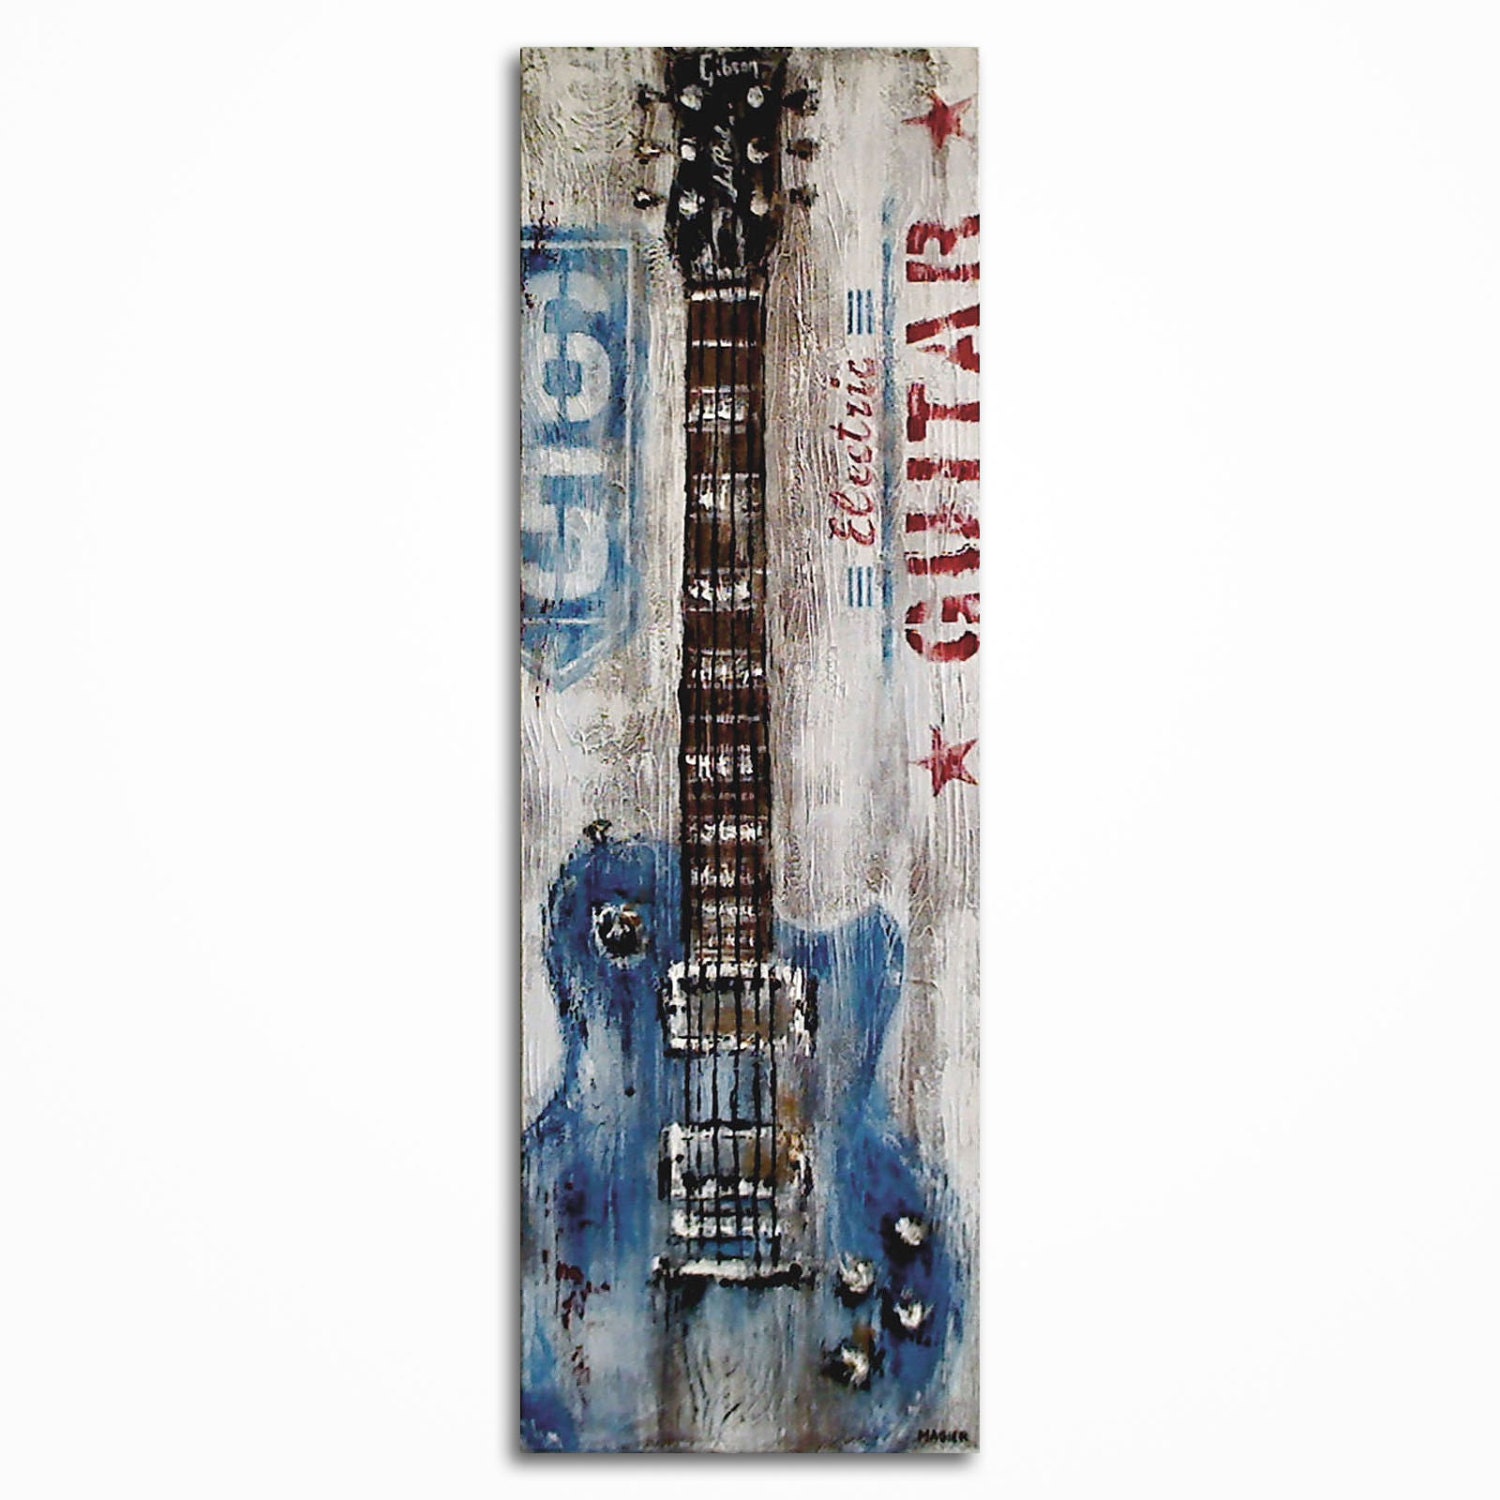 Guitar Art Rustic Vintage Inspired Music Art Gift for a